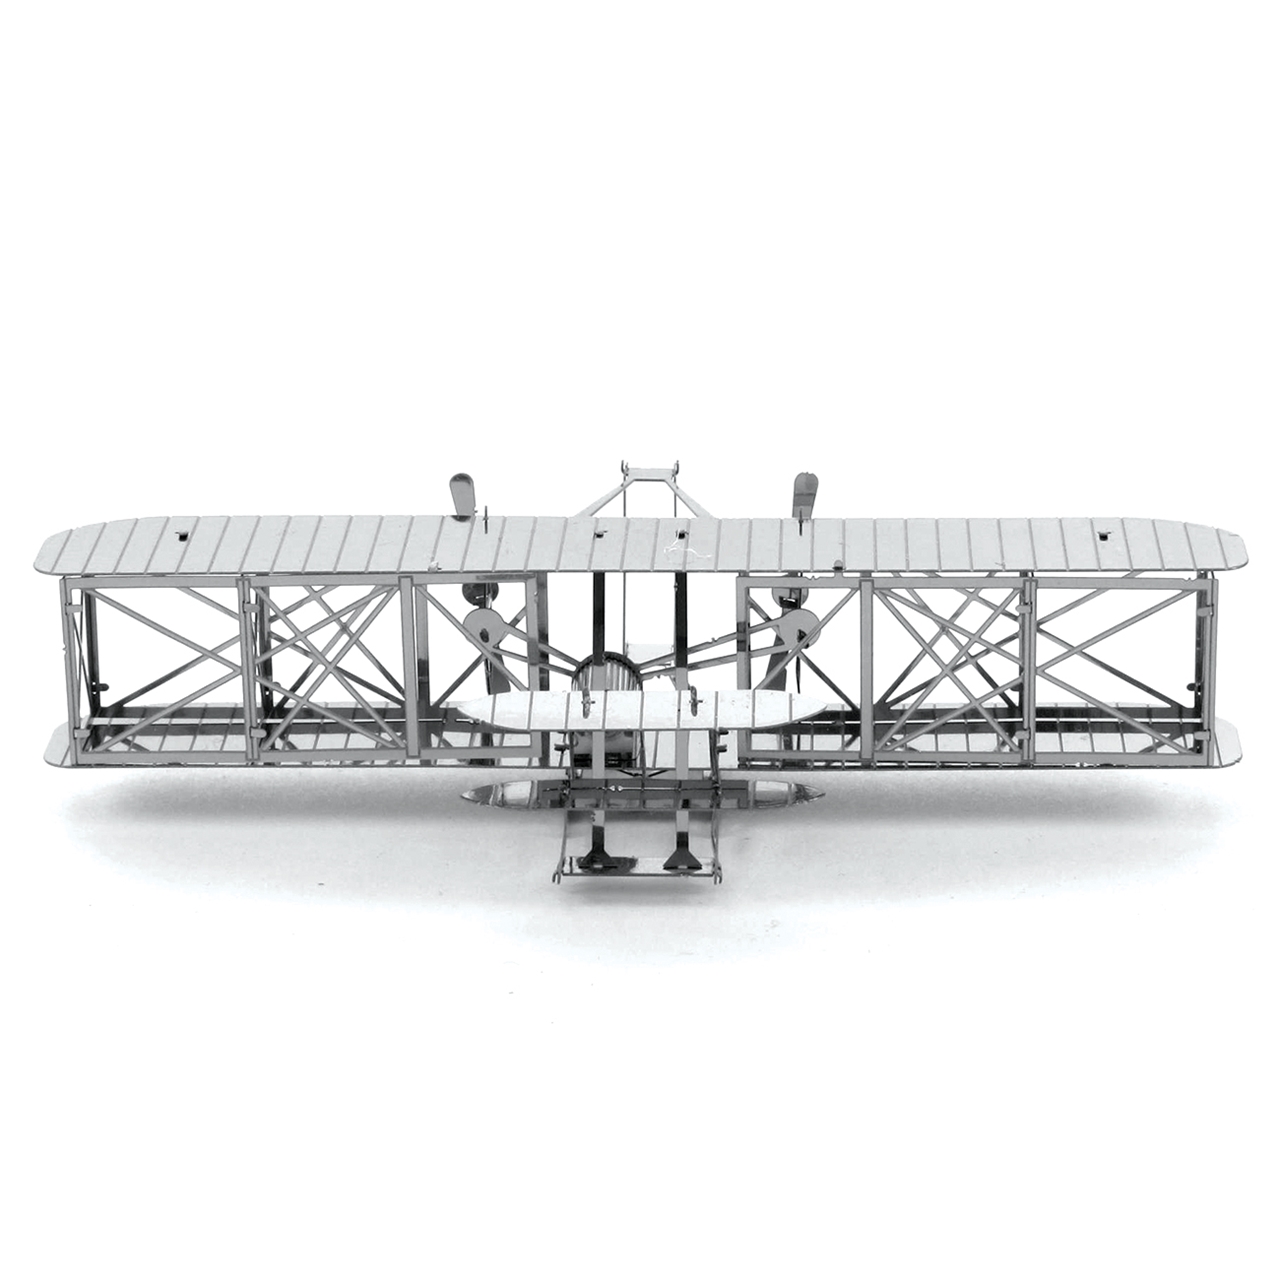 Fascinations Metal Earth 3D Laser Cut Steel Model Kit Wright Brothers Airplane 